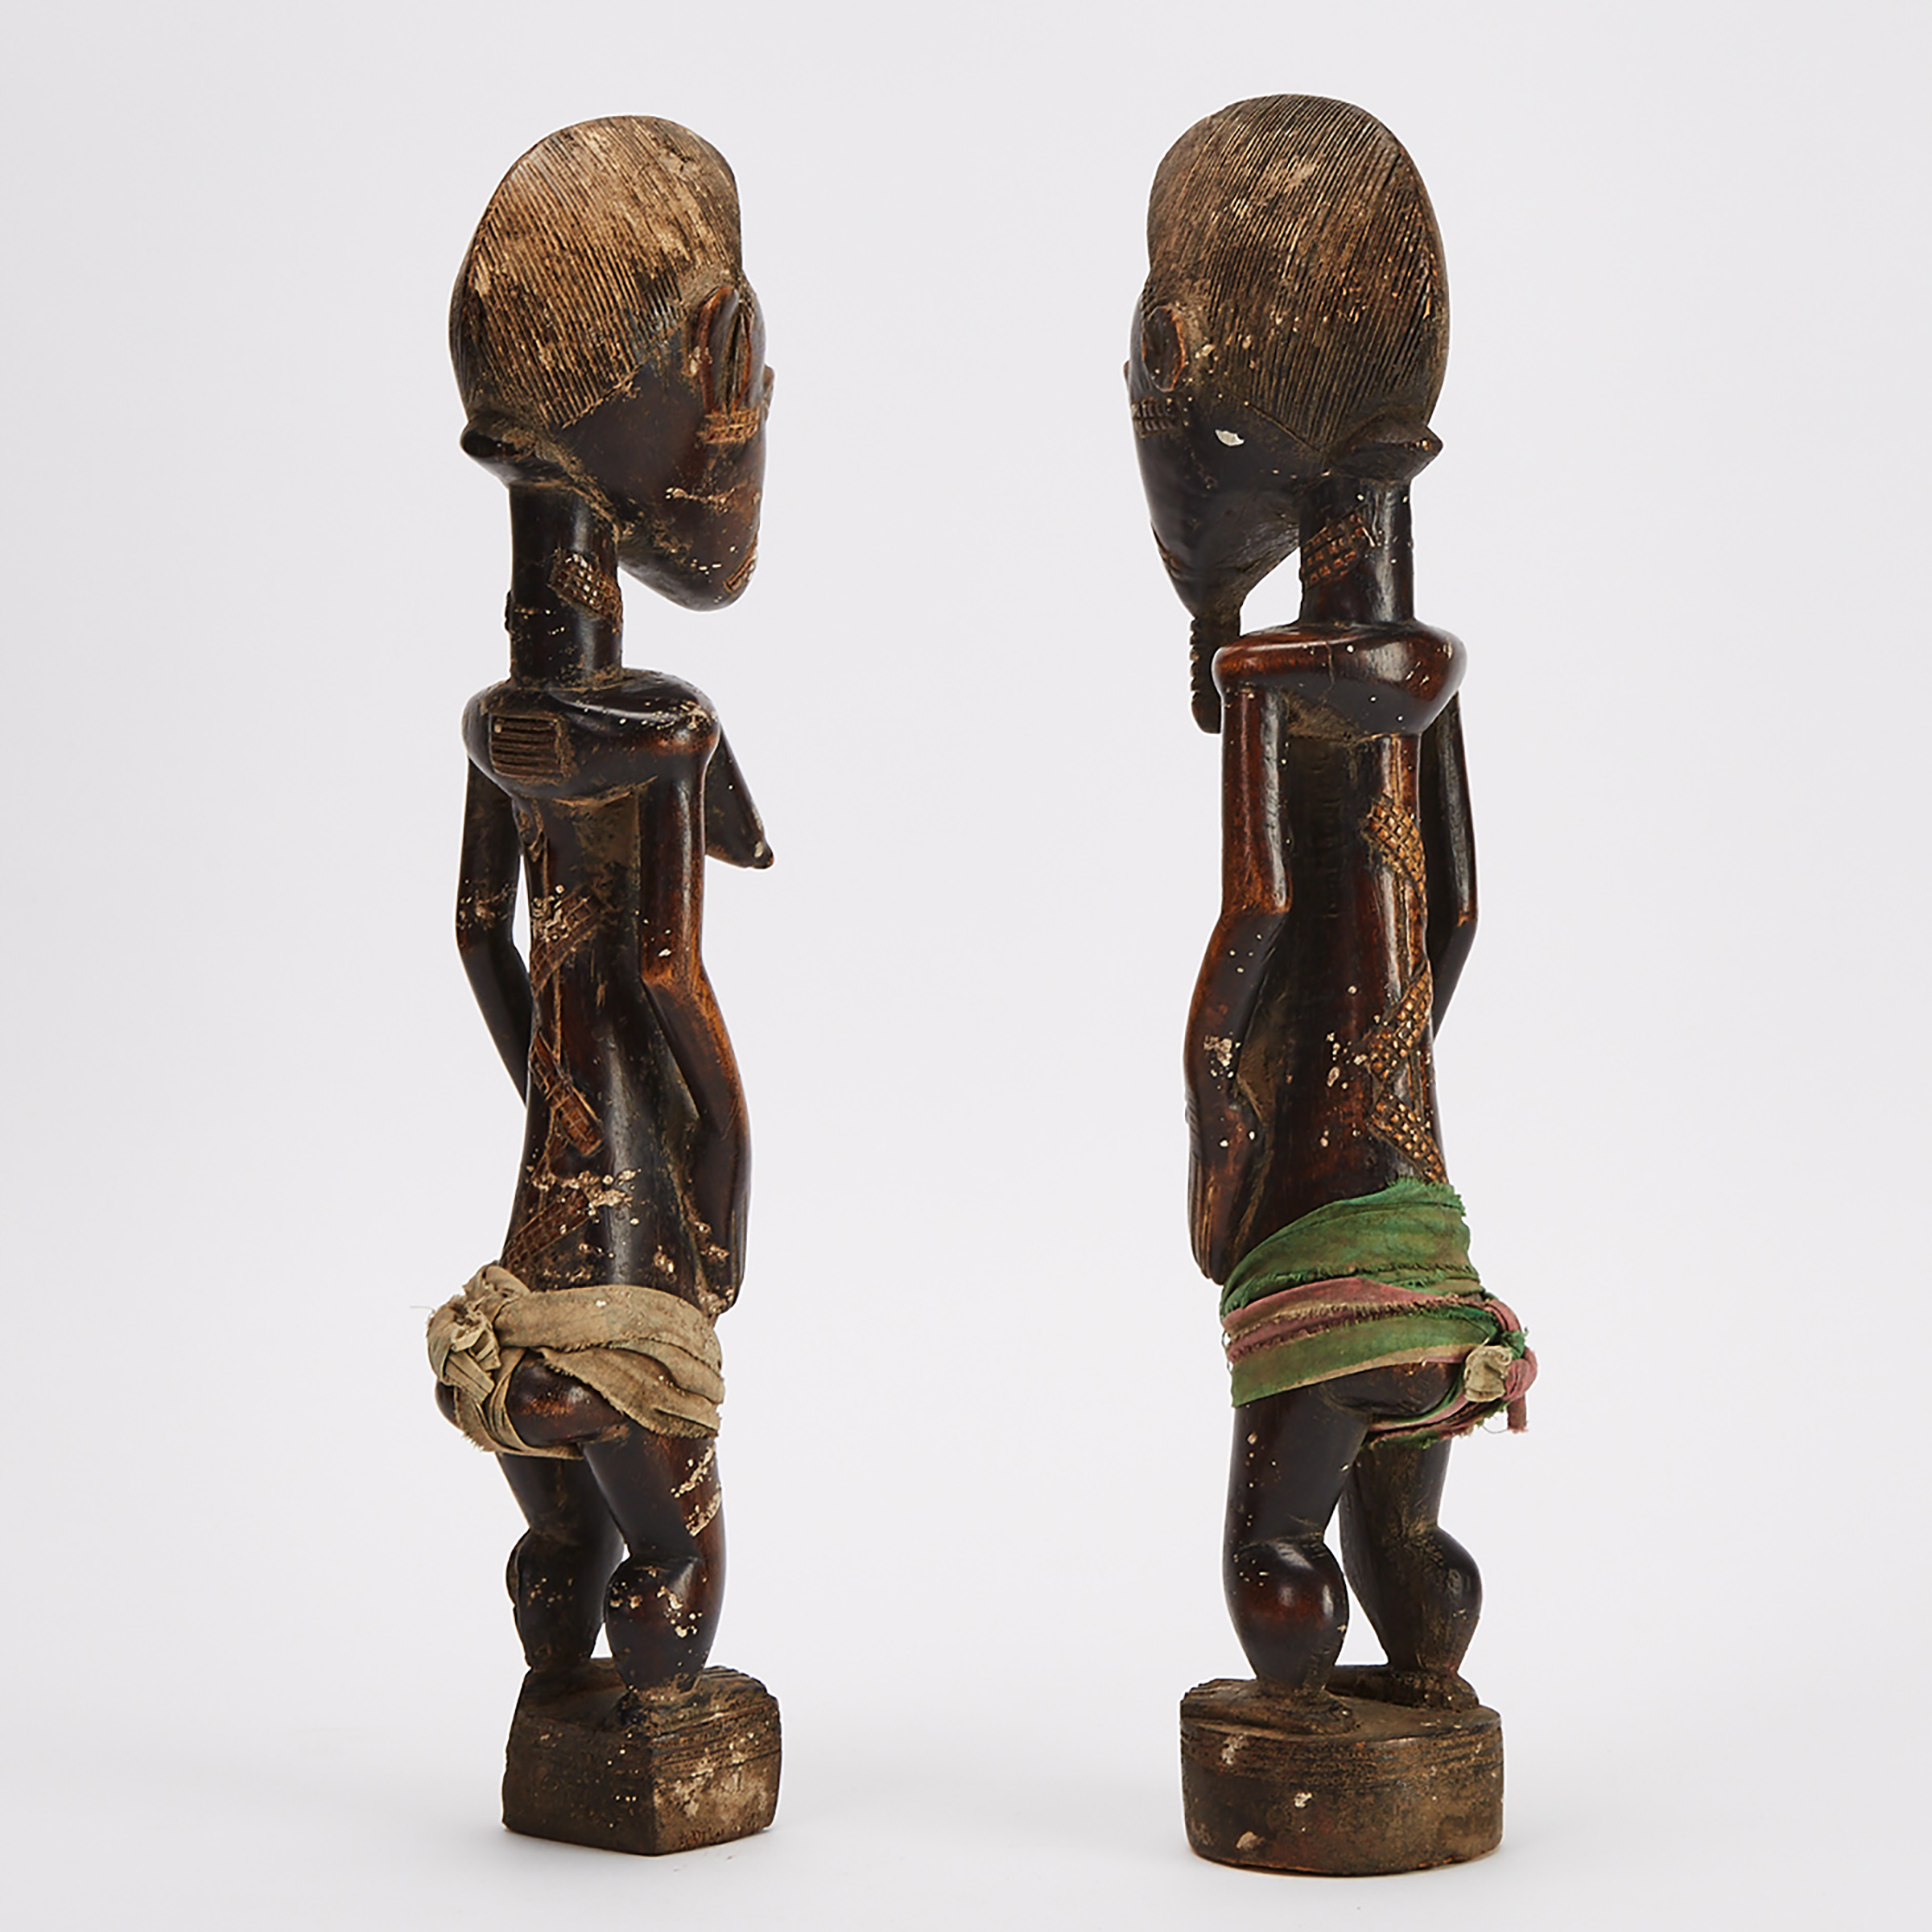 A Pair of Baule Male and Female Ancestral Figures, Ivory Coast, West Africa